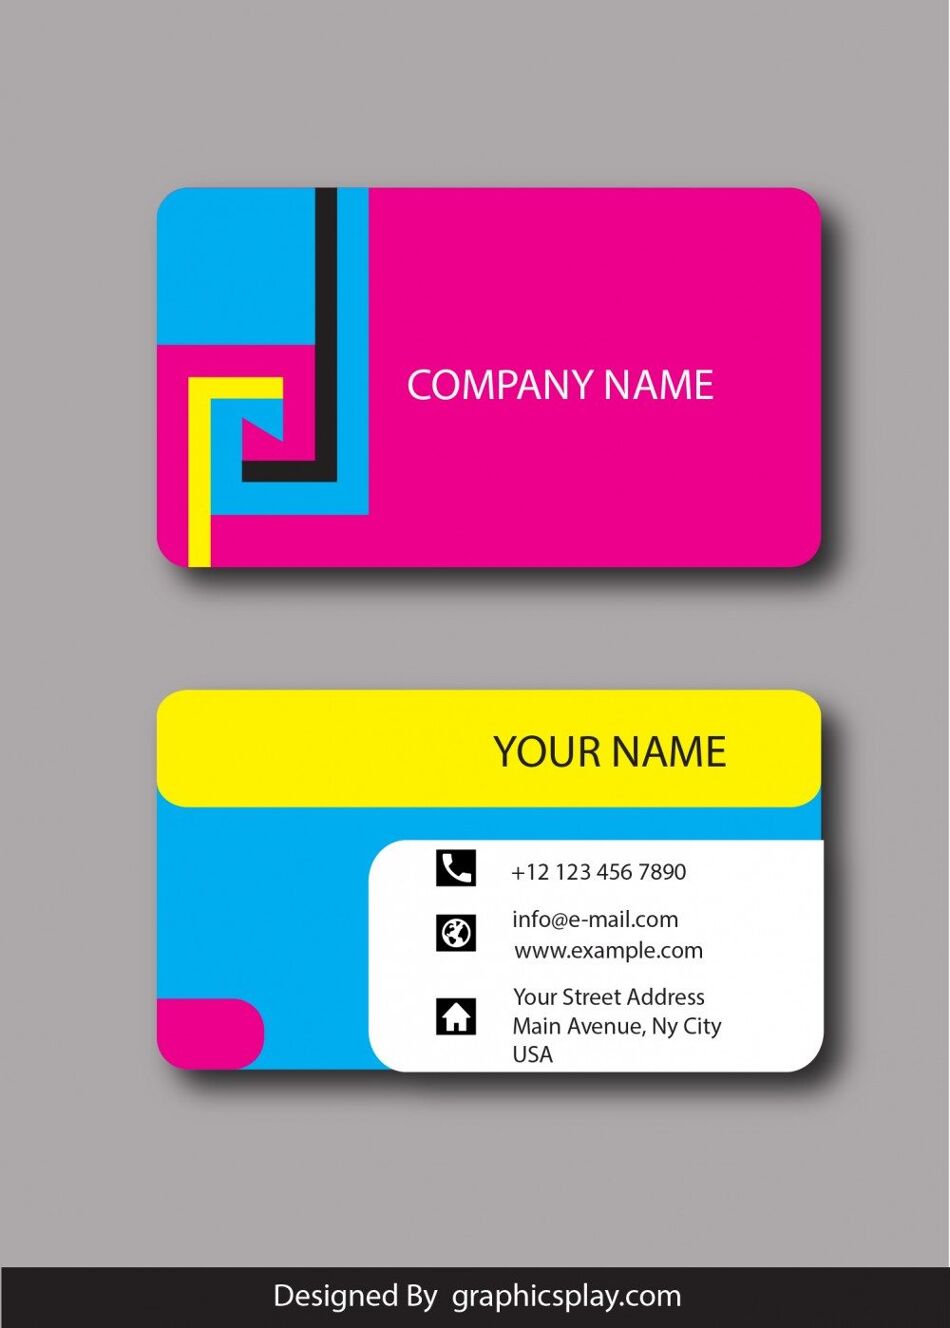 Business Card Design Vector Template - ID 1800 1